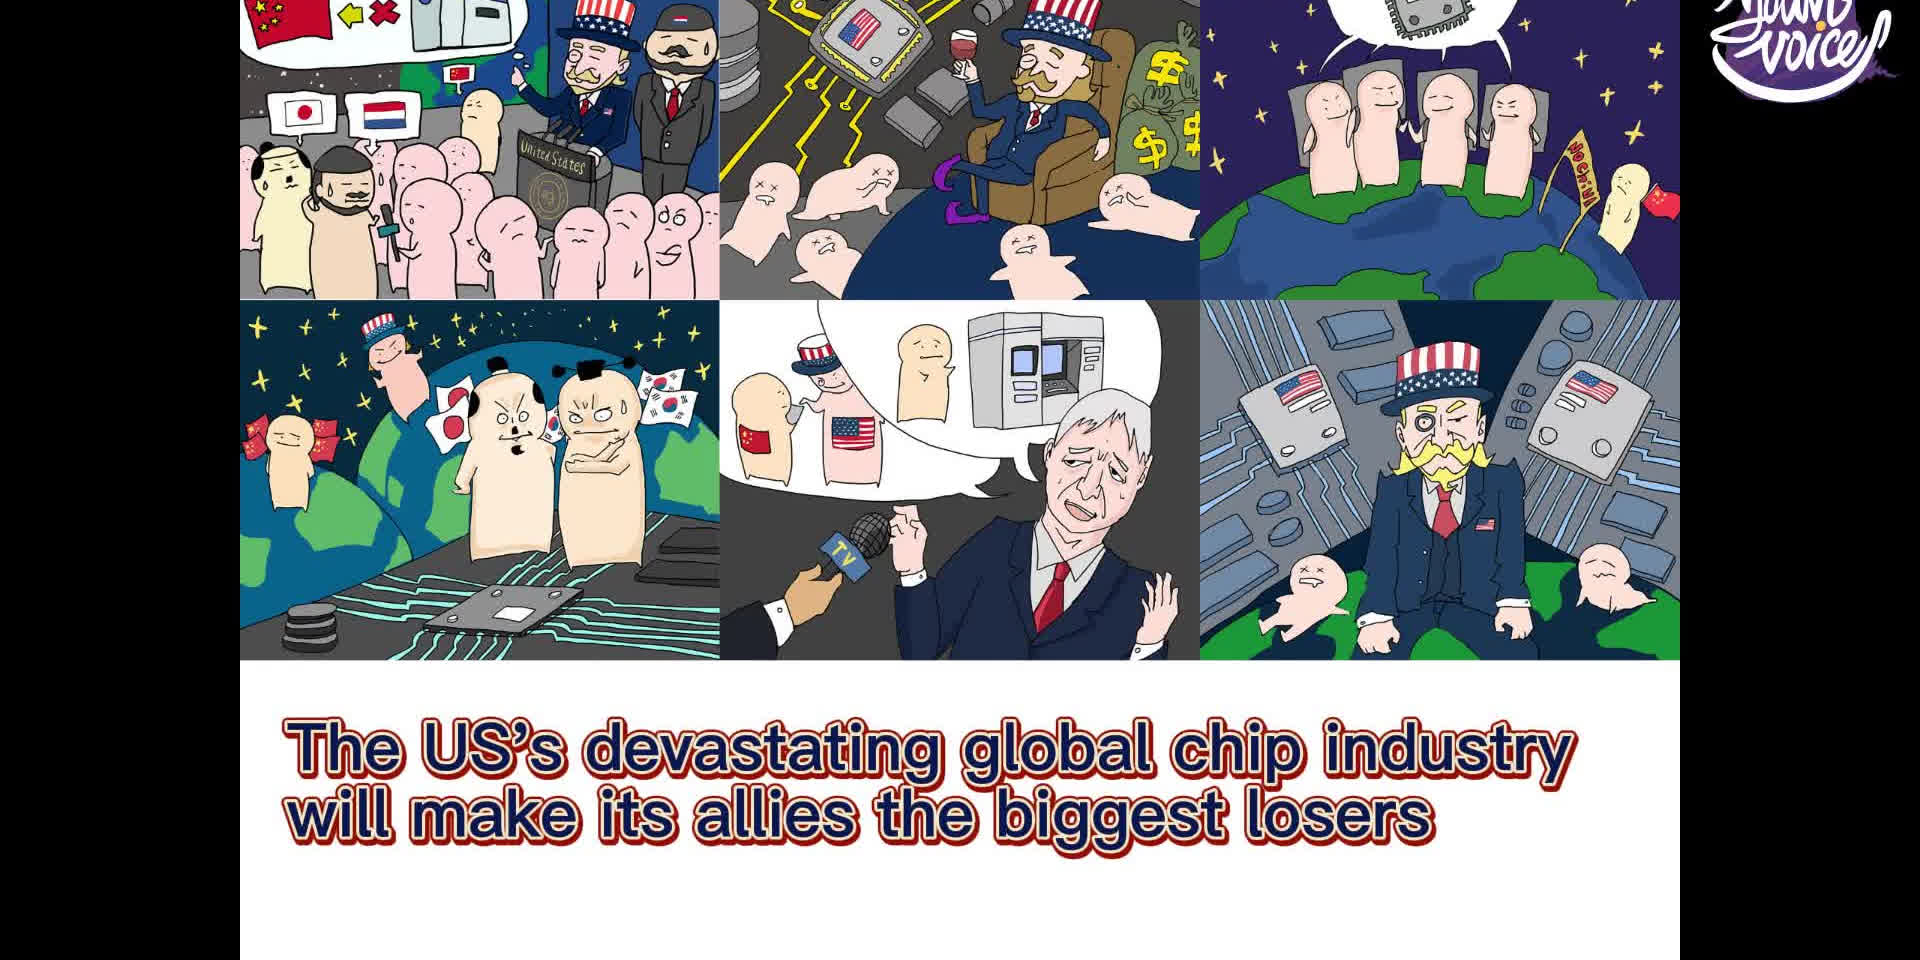 Watch This | US's devastating global chip industry will make its allies the biggest losers